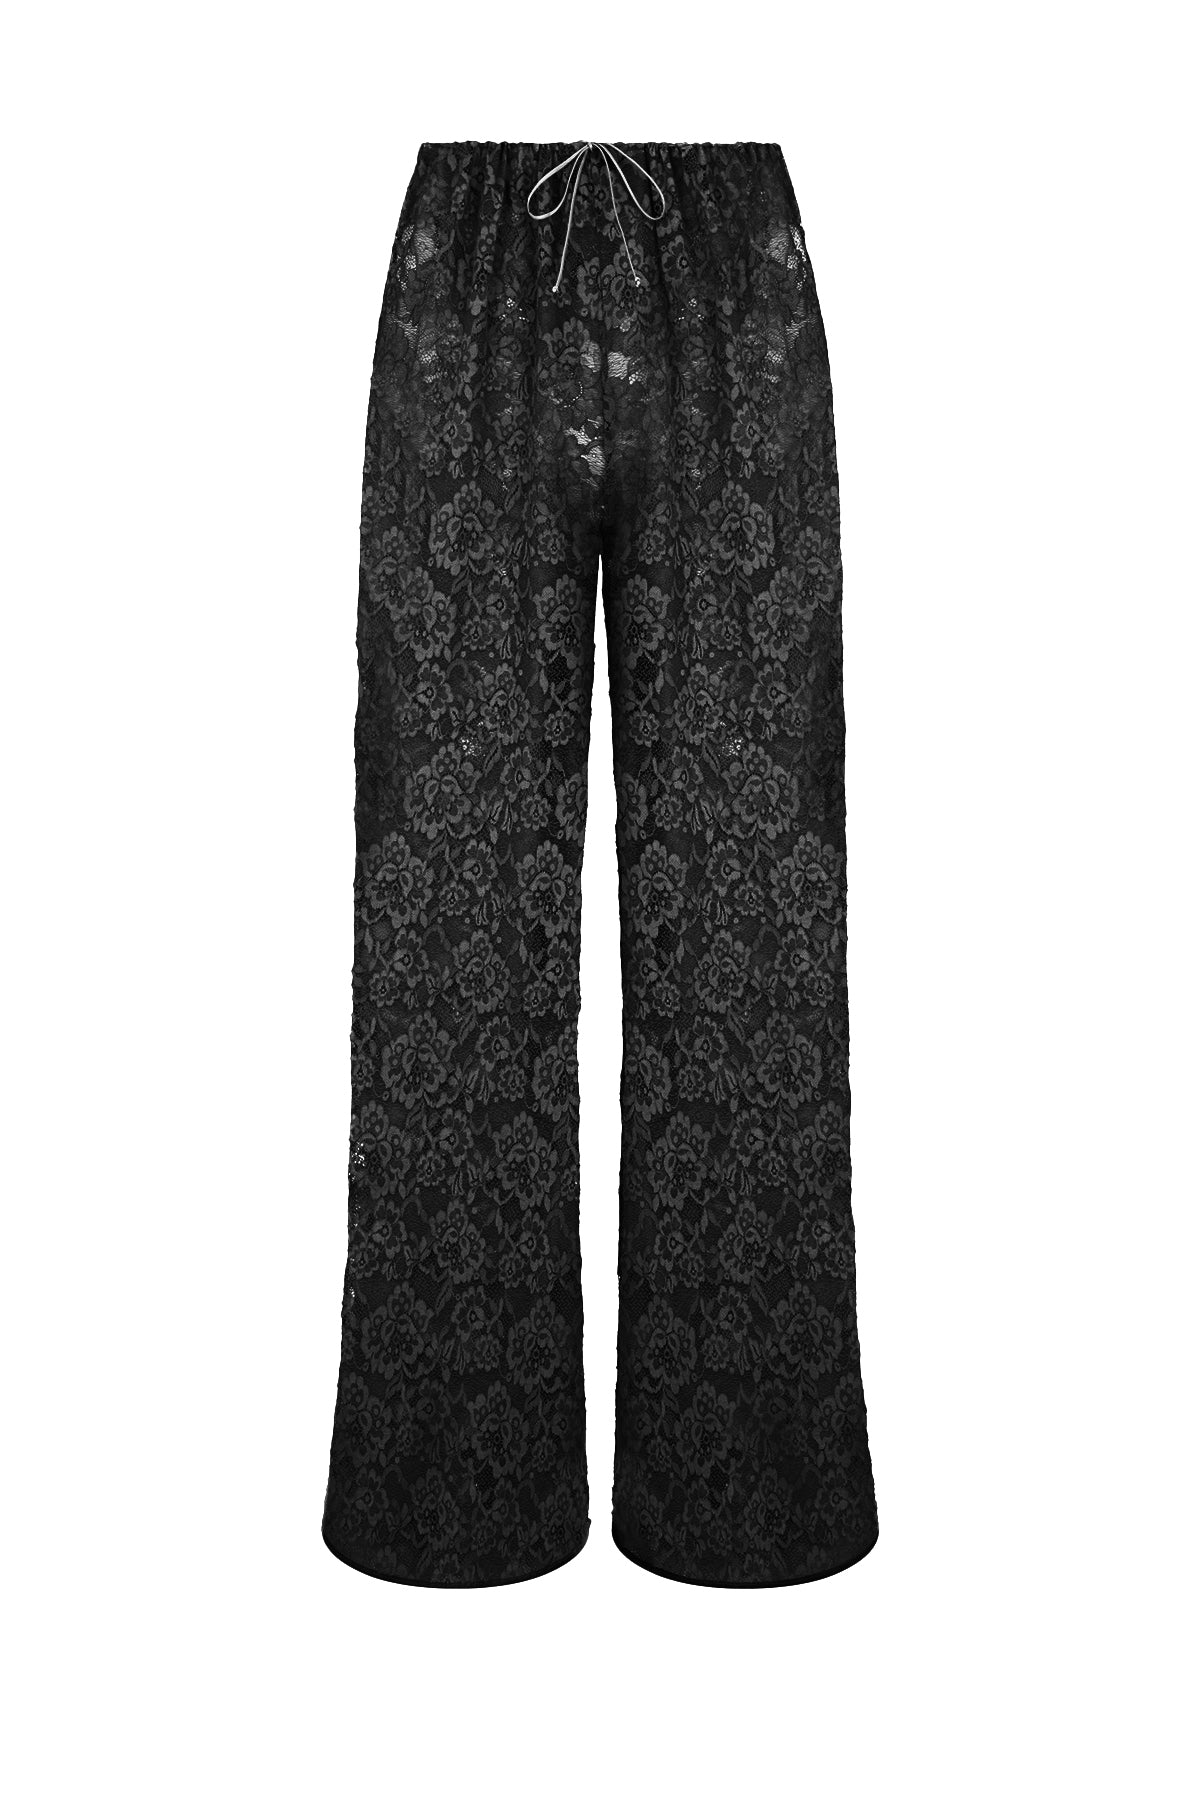 O-Lover Lace Pants